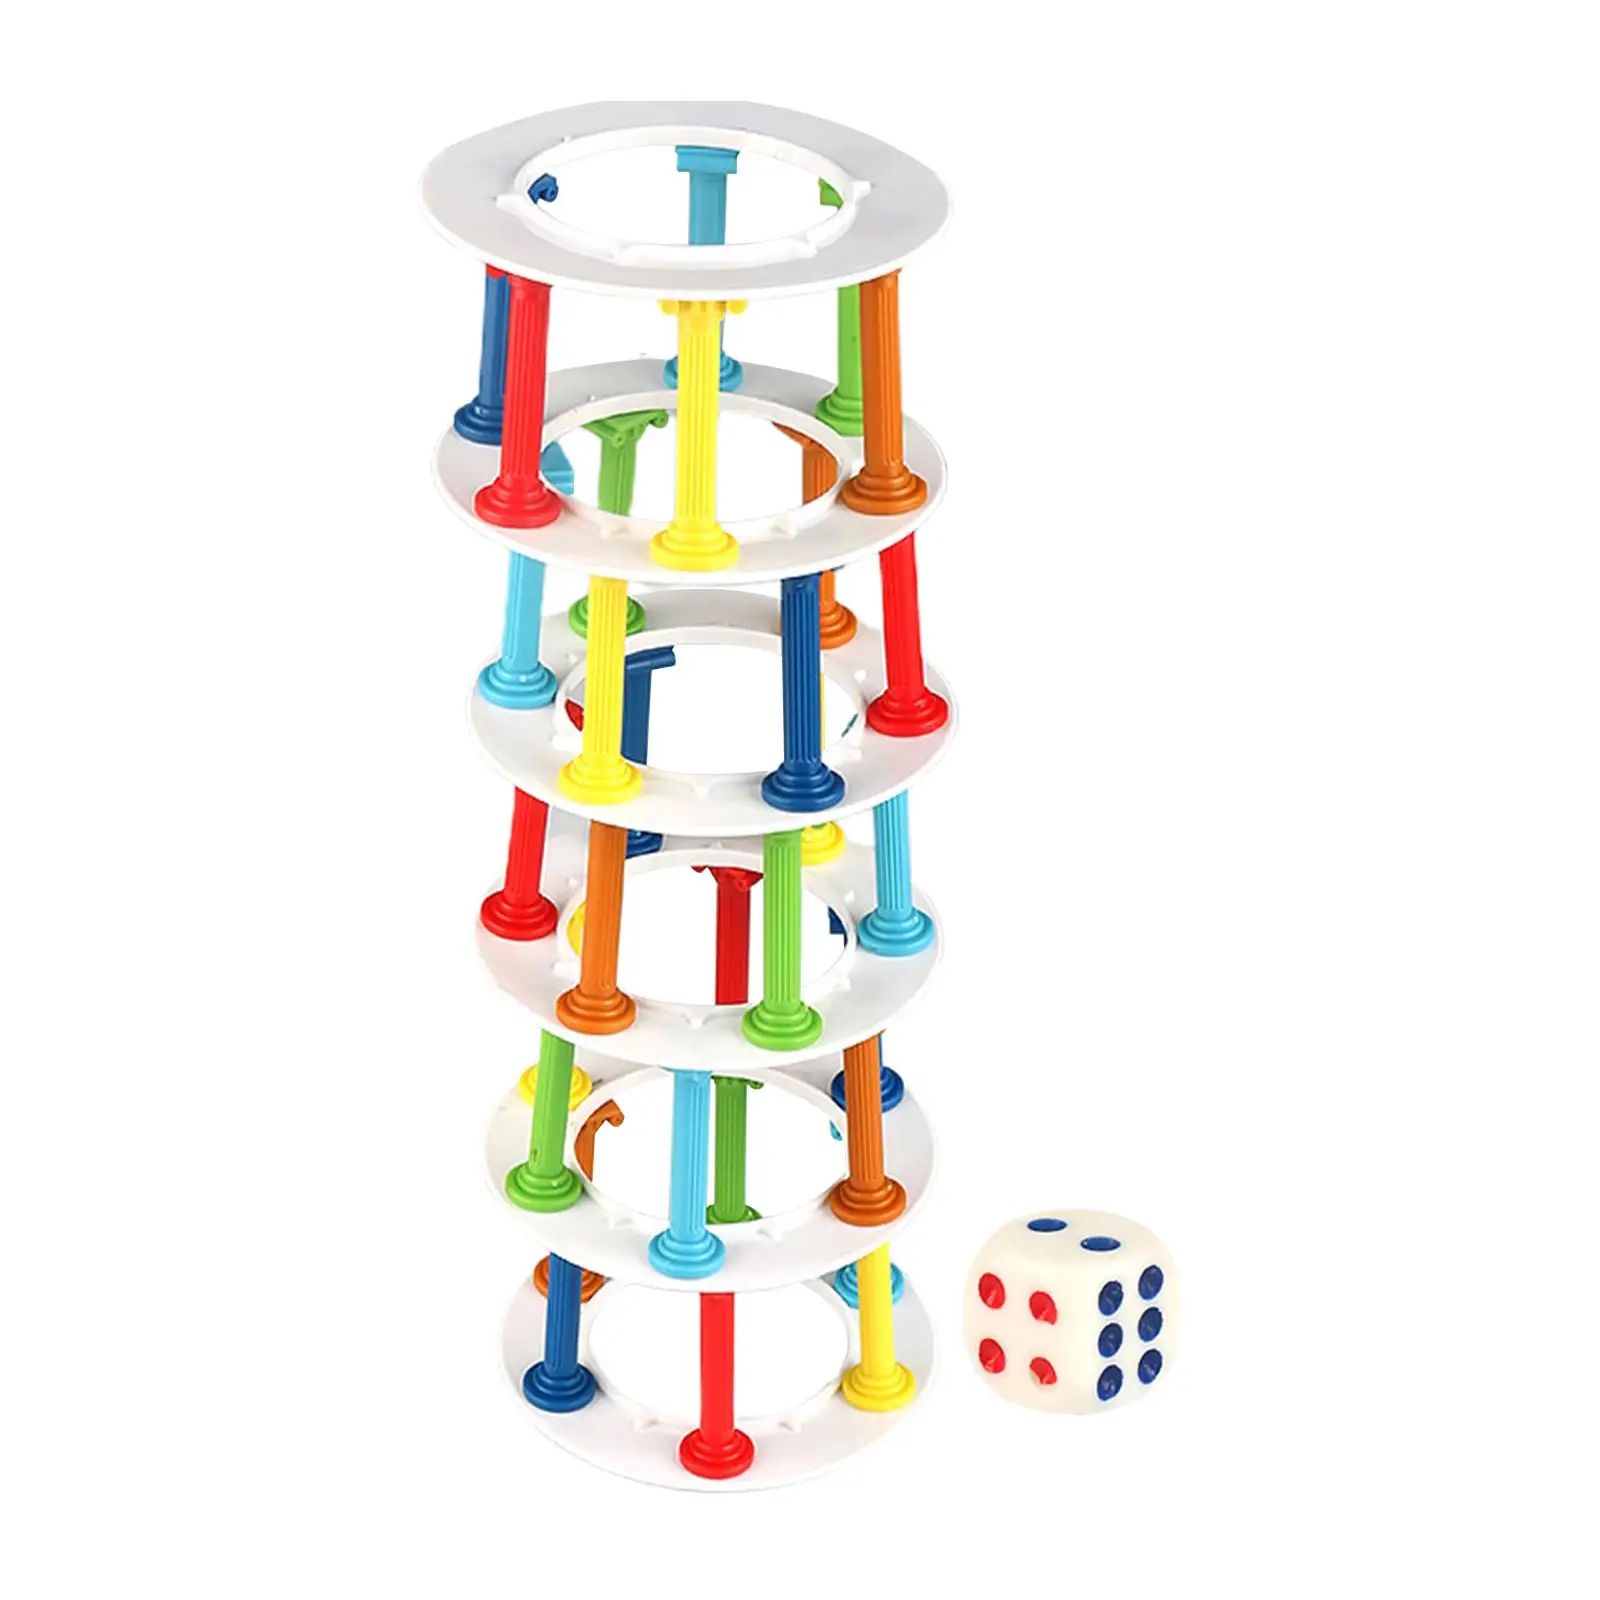 Tumble Tower Game Classic Games with Dice Fine Motor Skill Game Stacking Tumble Tower for Travel Indoor Boys Girls